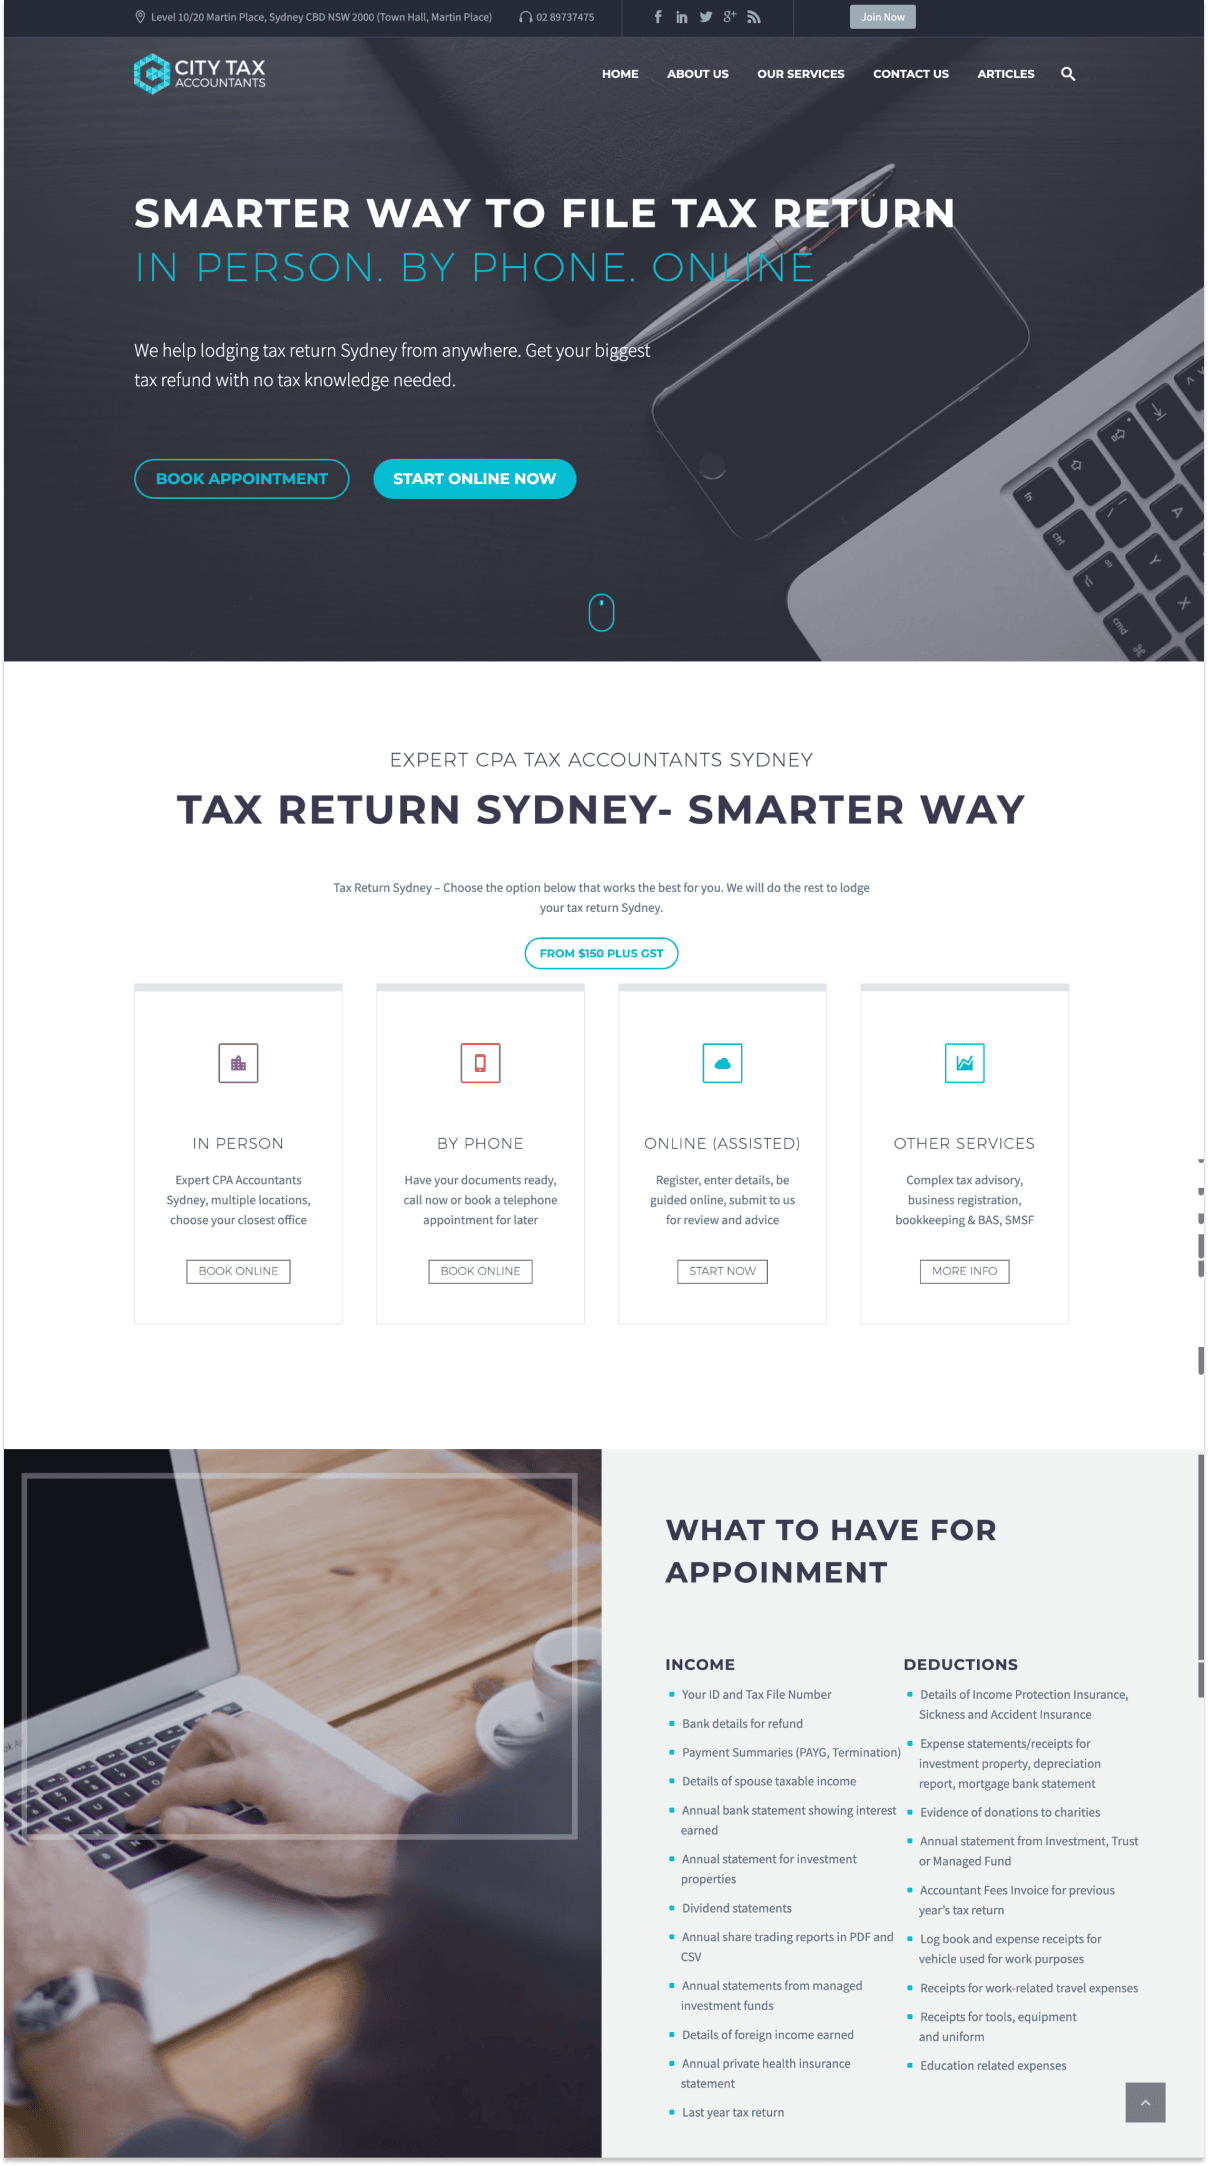 City Tax Accountants allow clients to book a time slot right from their website